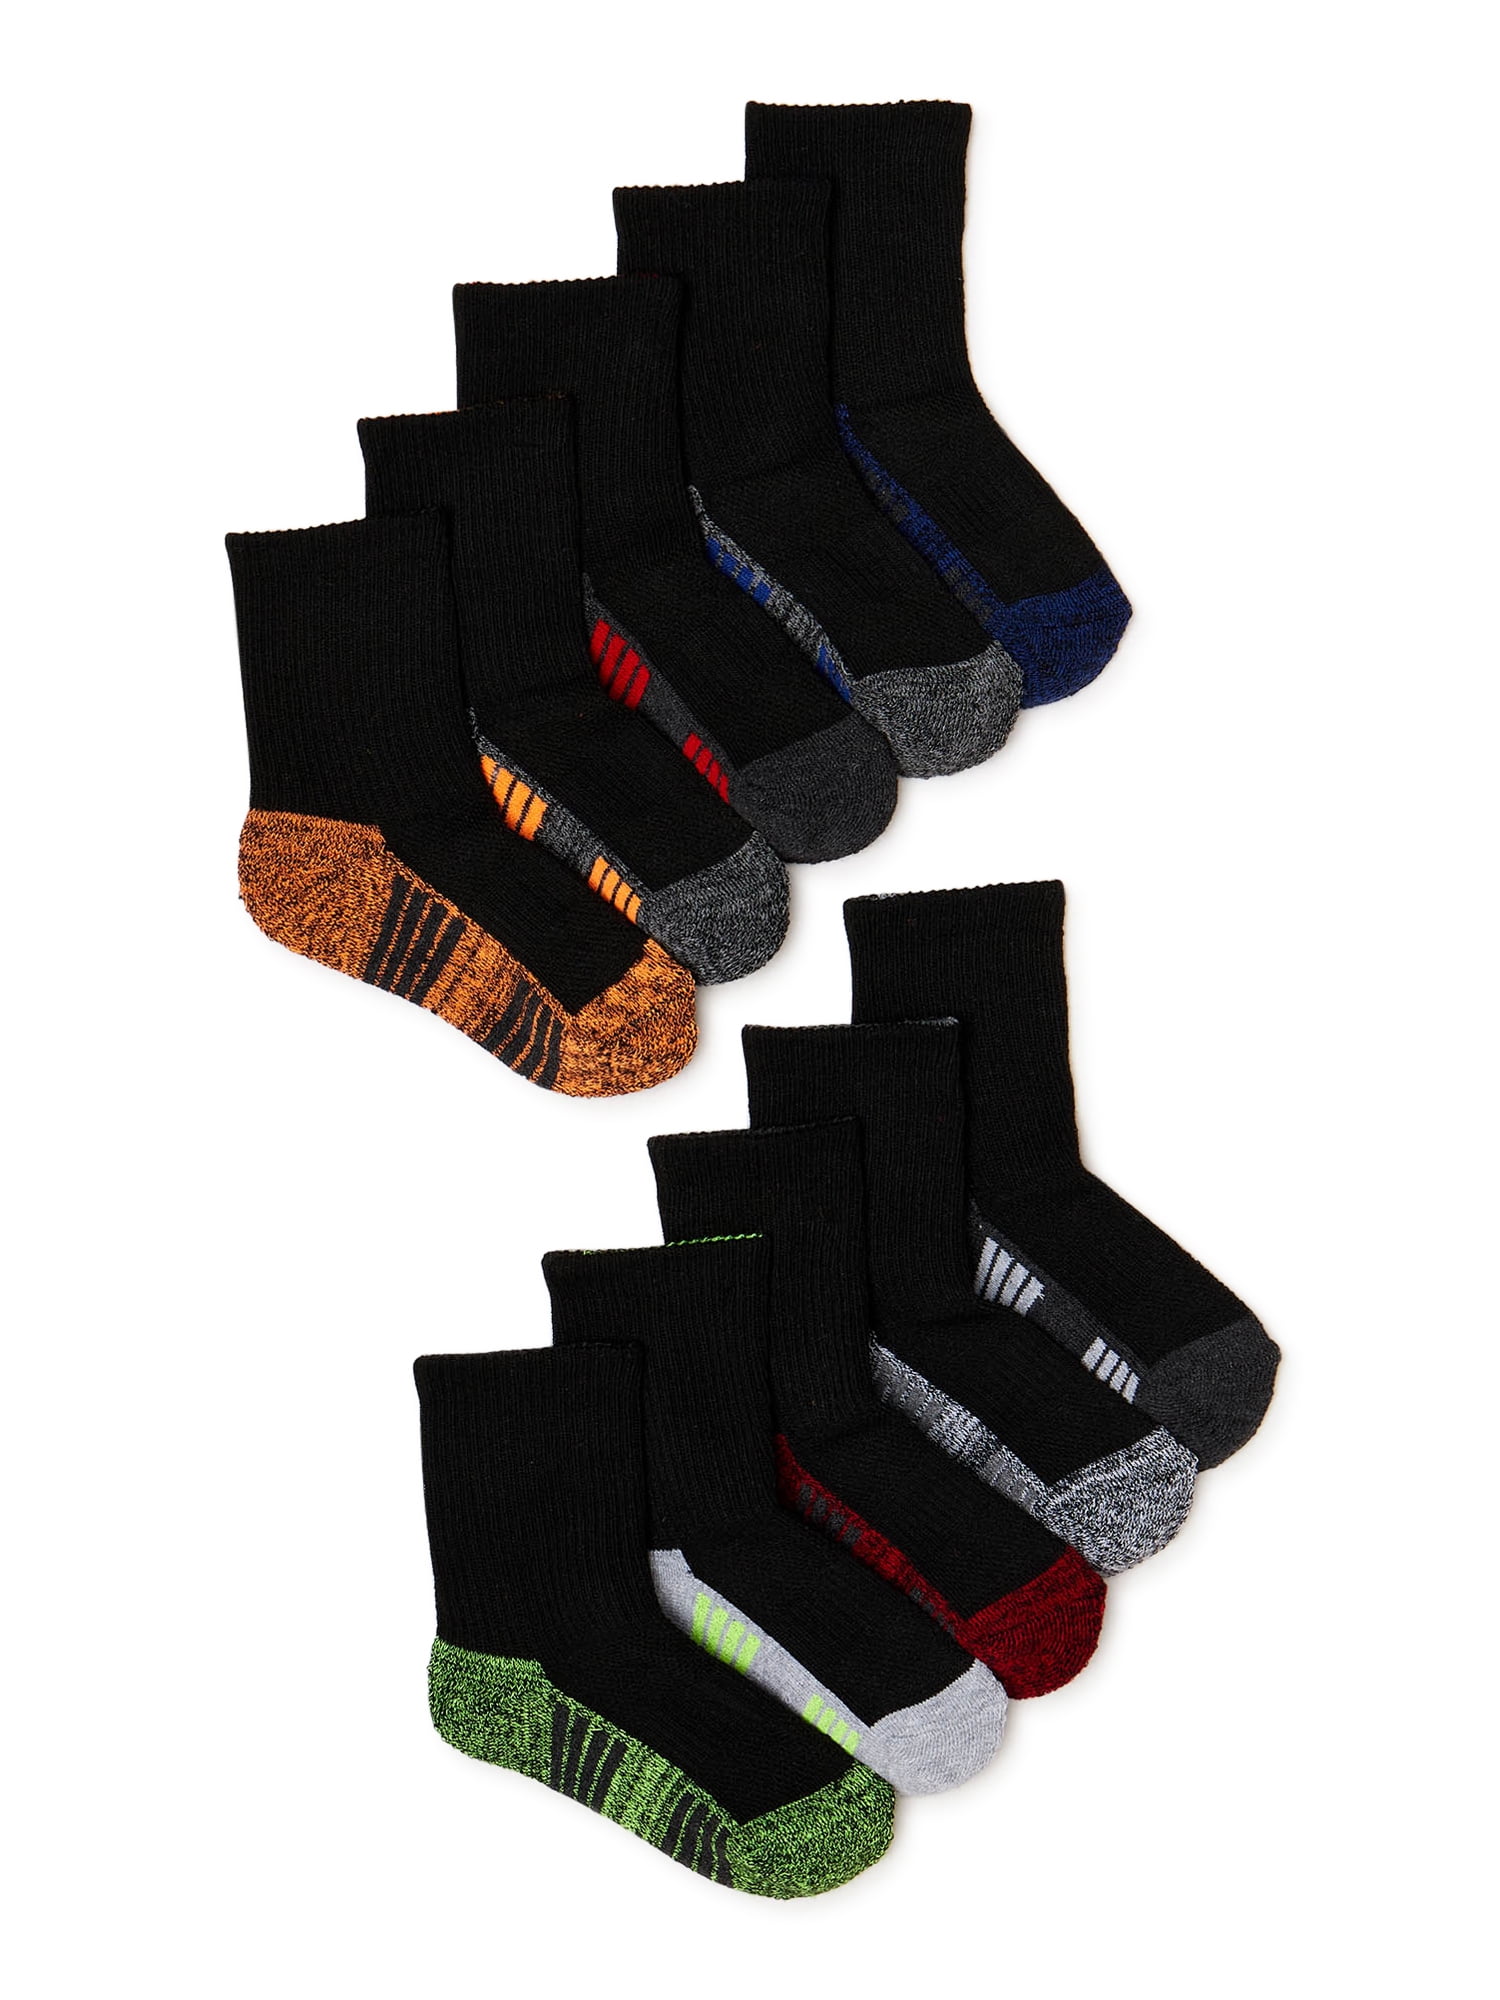 Old Label Crazy Socks Casual Cotton Crew Socks Cute Funny Sock great for sports and hiking 